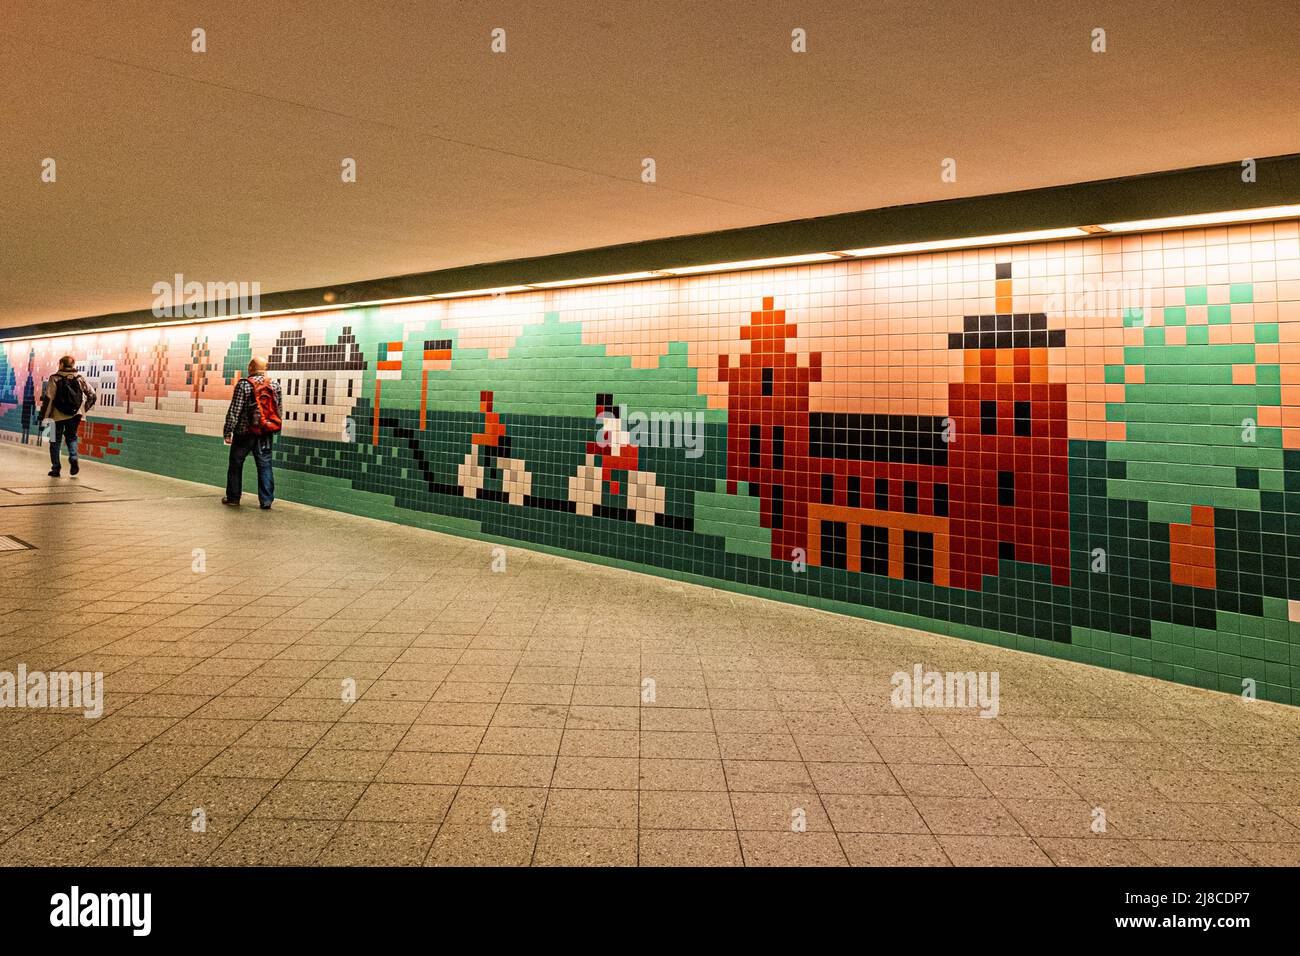 Berlin-Wannsee railway station interior tiled passage depicts local sights. Important junction in the commuter transport network serving the S-bahn and Deutsche Bahn train services. Stock Photo